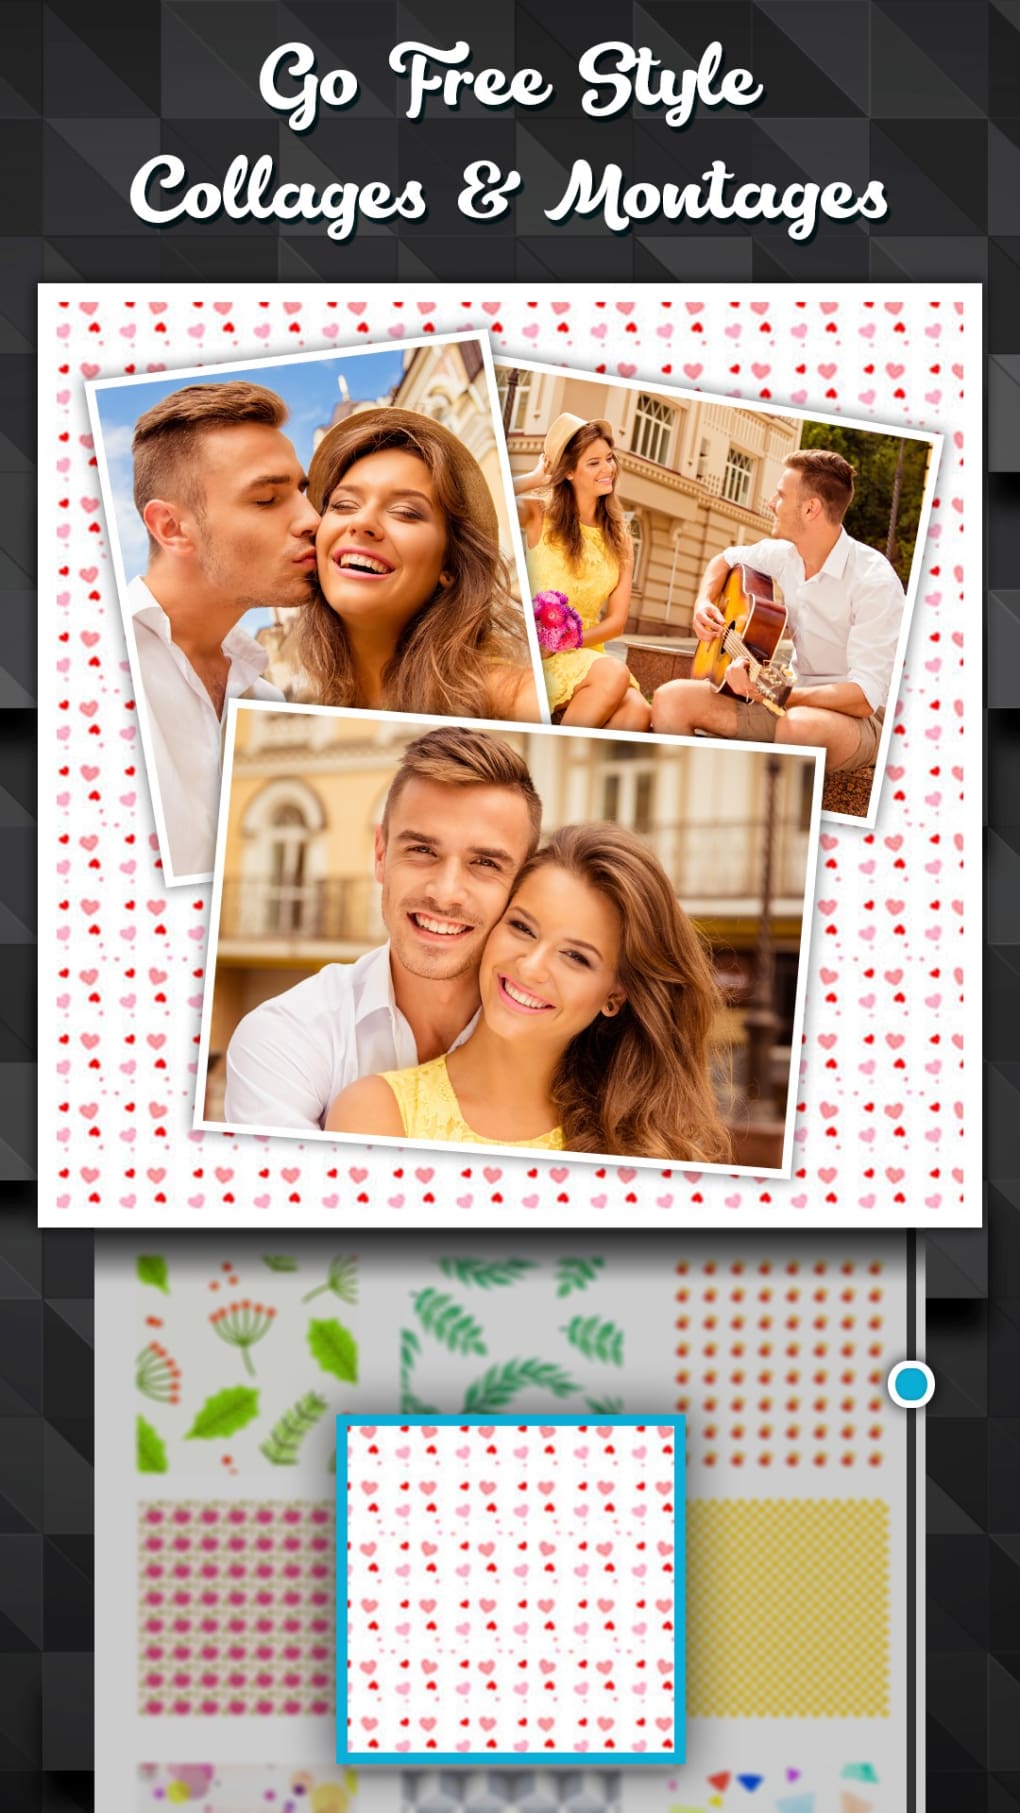 photo grid collage maker free download for windows 7